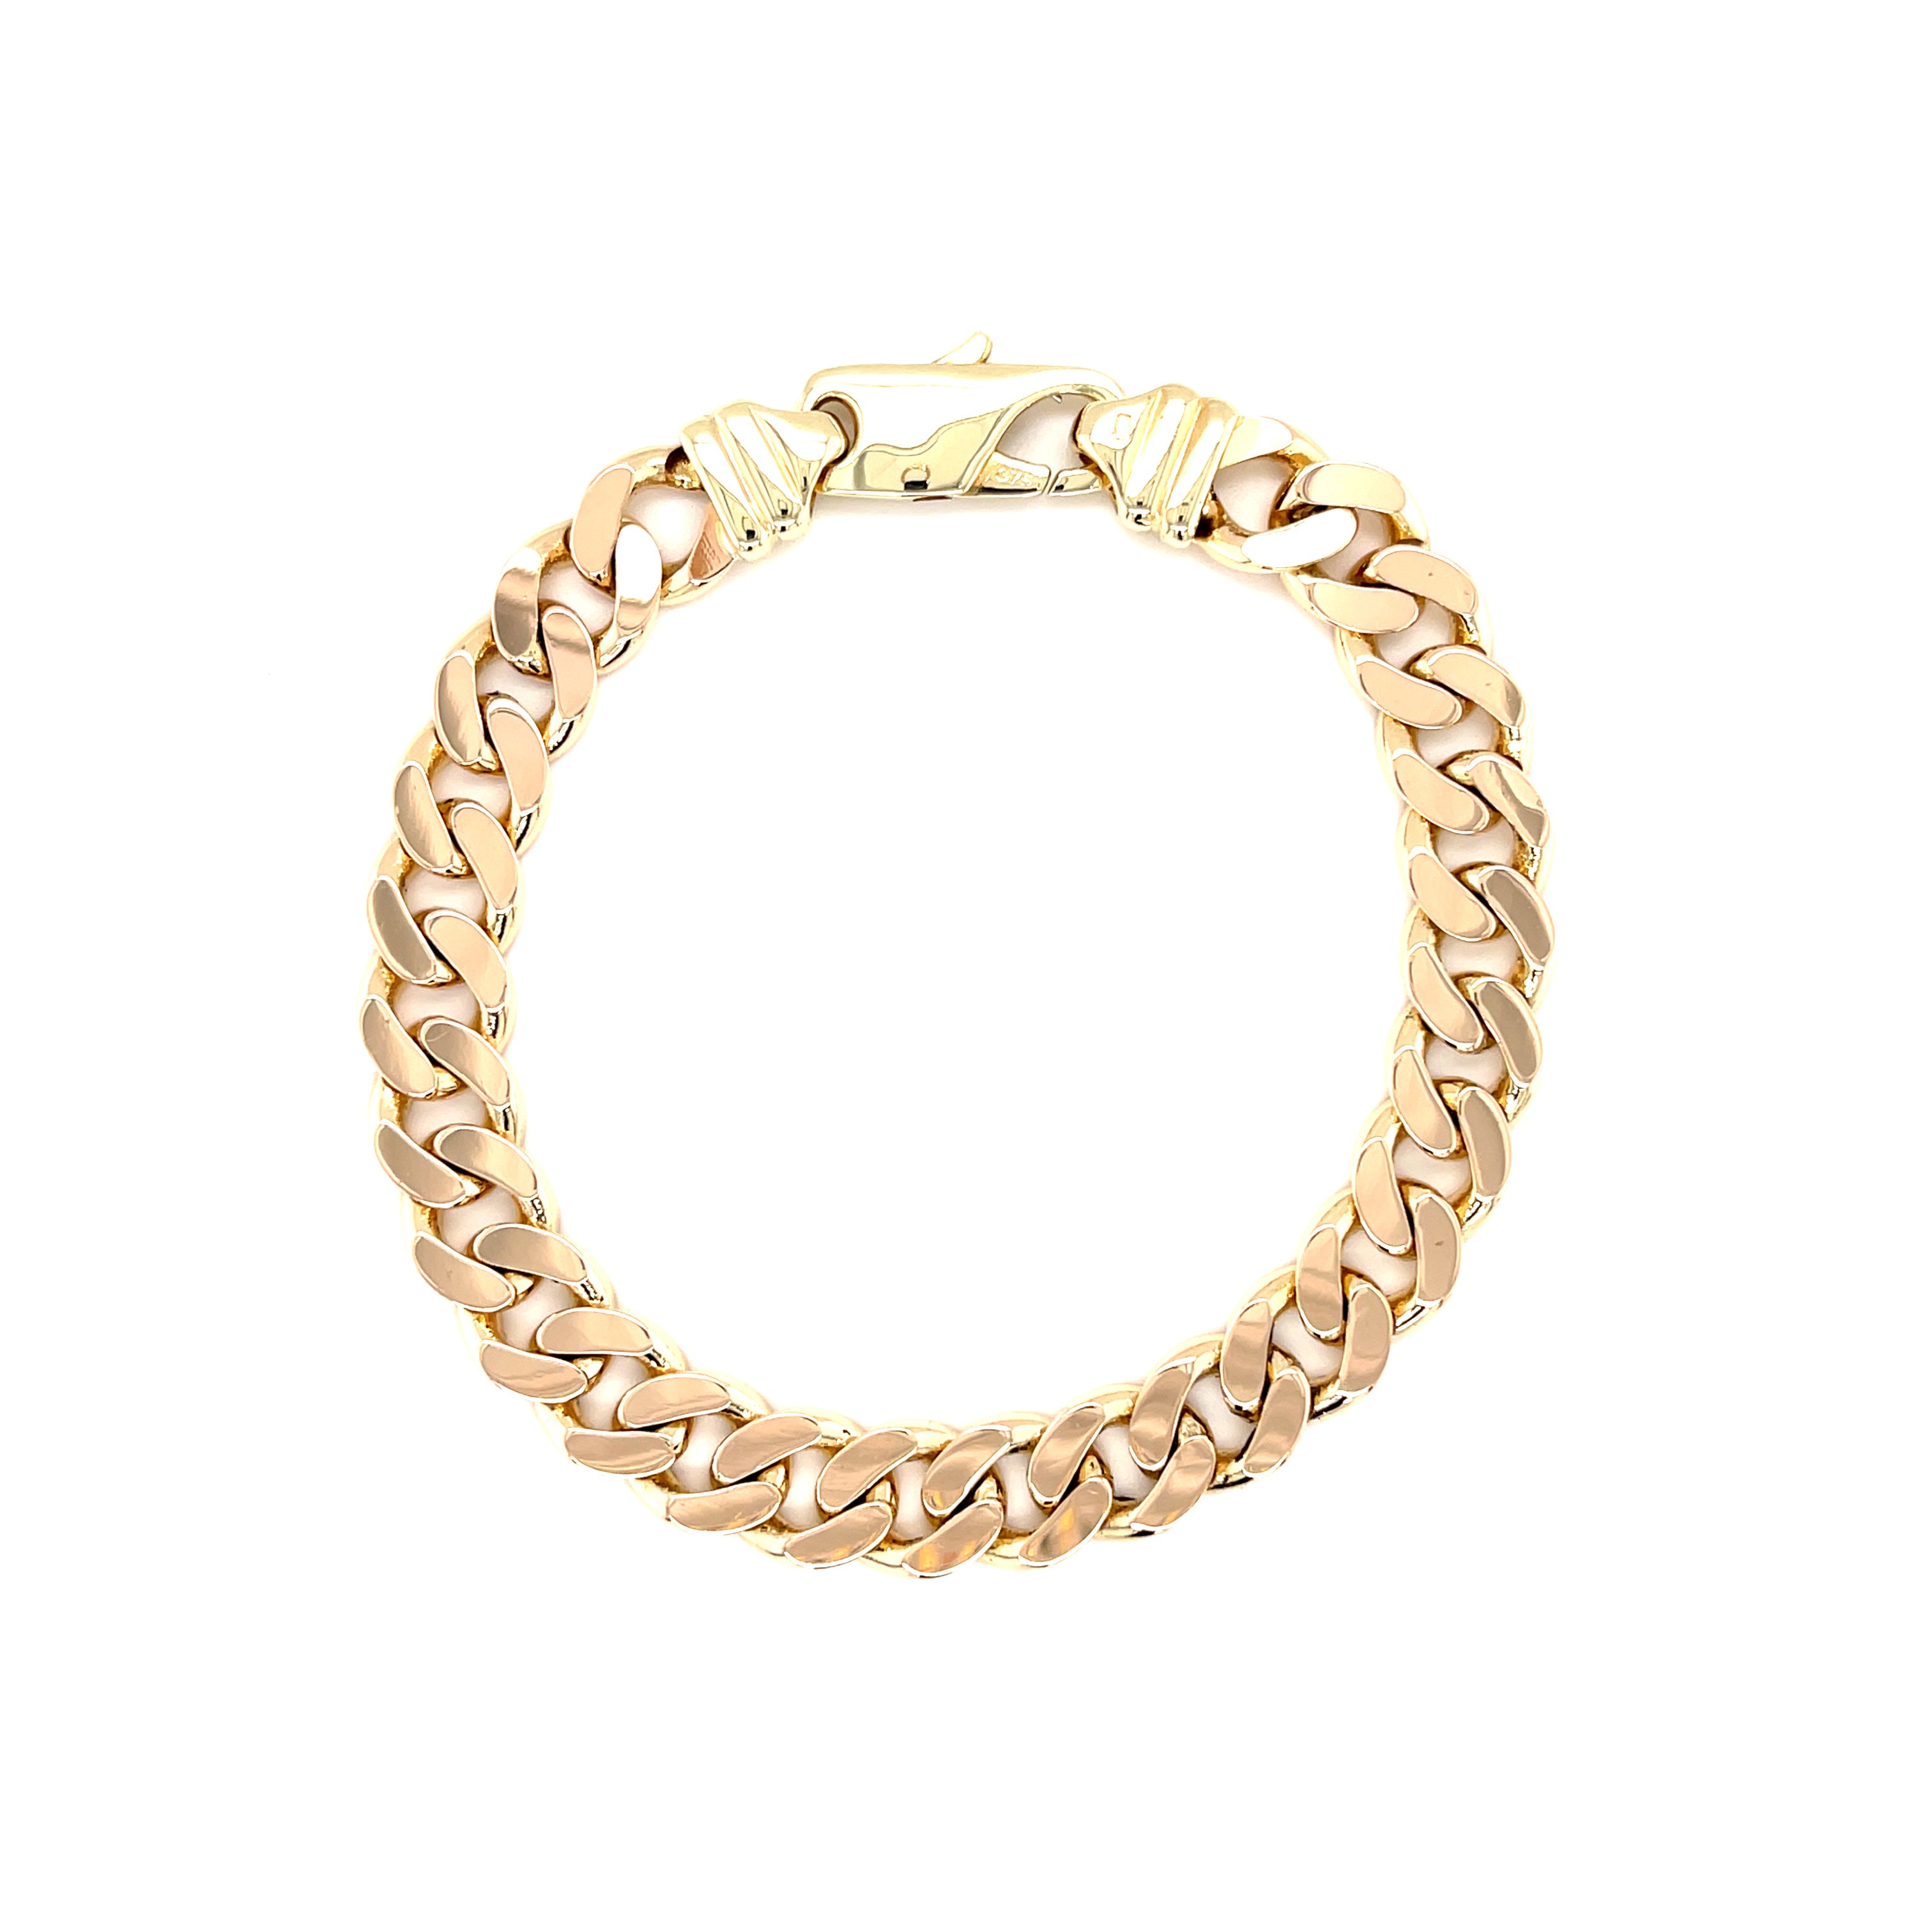 9ct Yellow Gold 8 Inch Flat Curb Link Bracelet - 29.66g